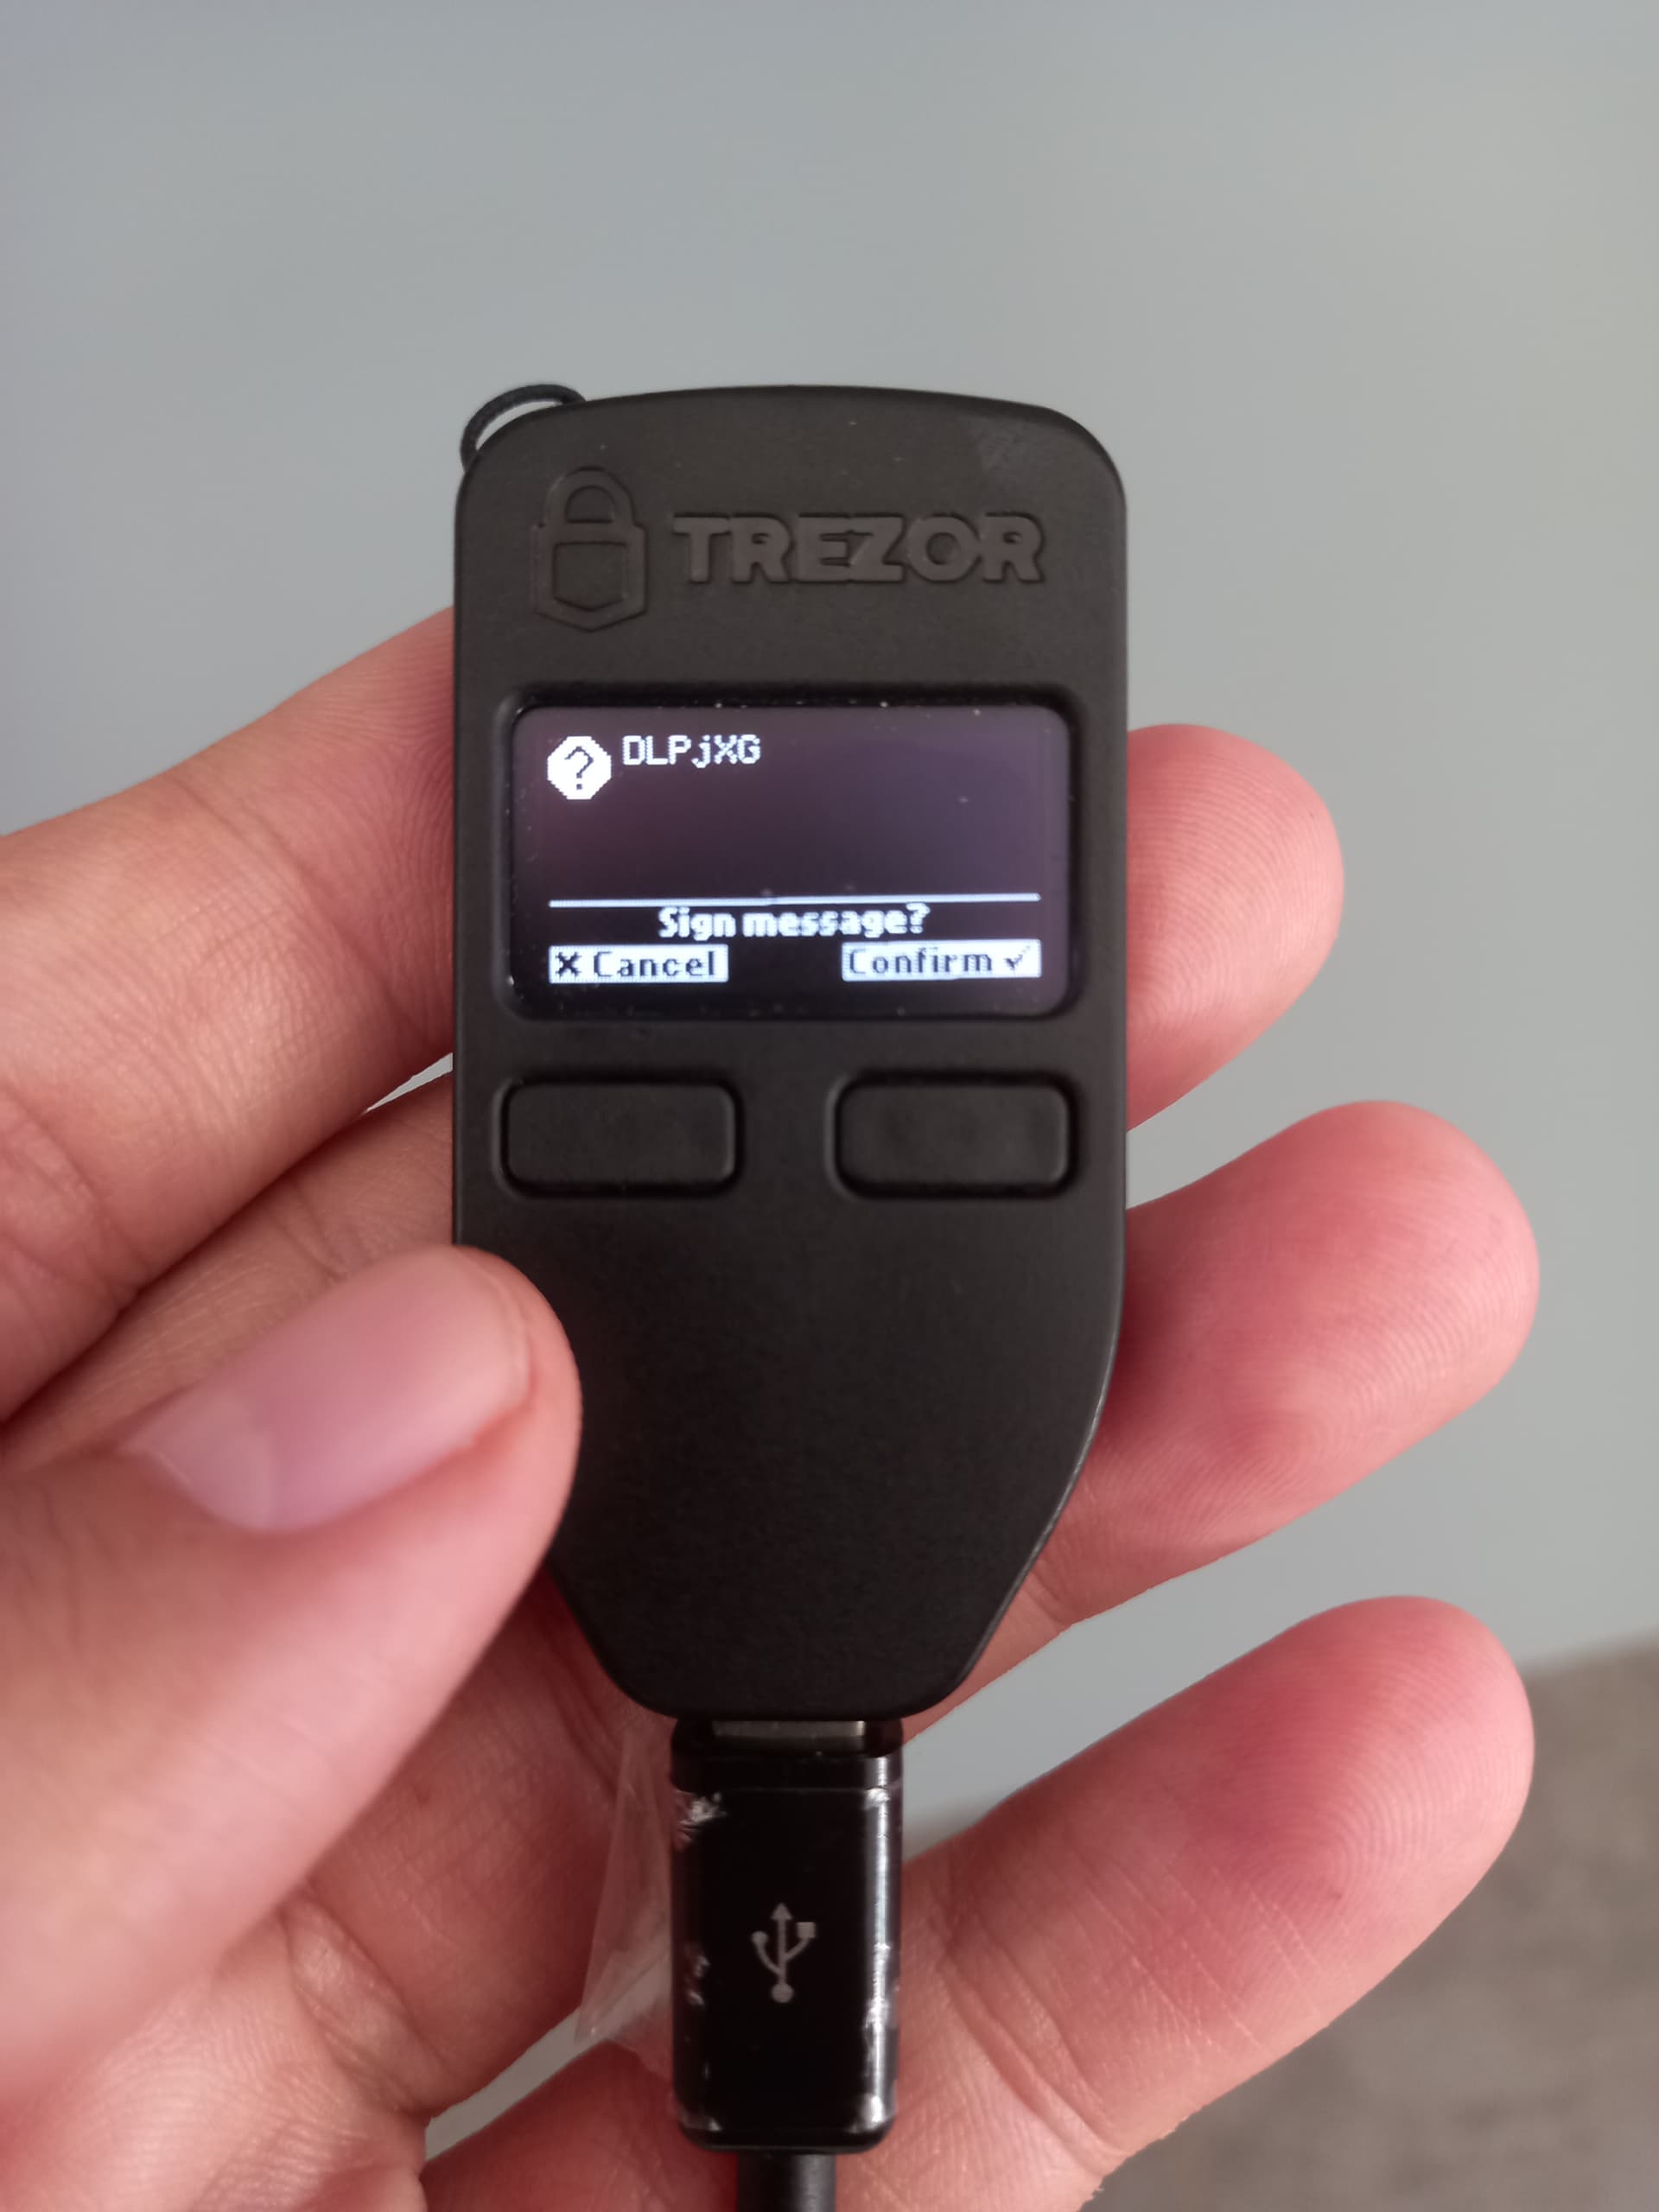 How to connect the Trezor hardware wallet to 1inch Network | bitcoinlog.fun - Help Center